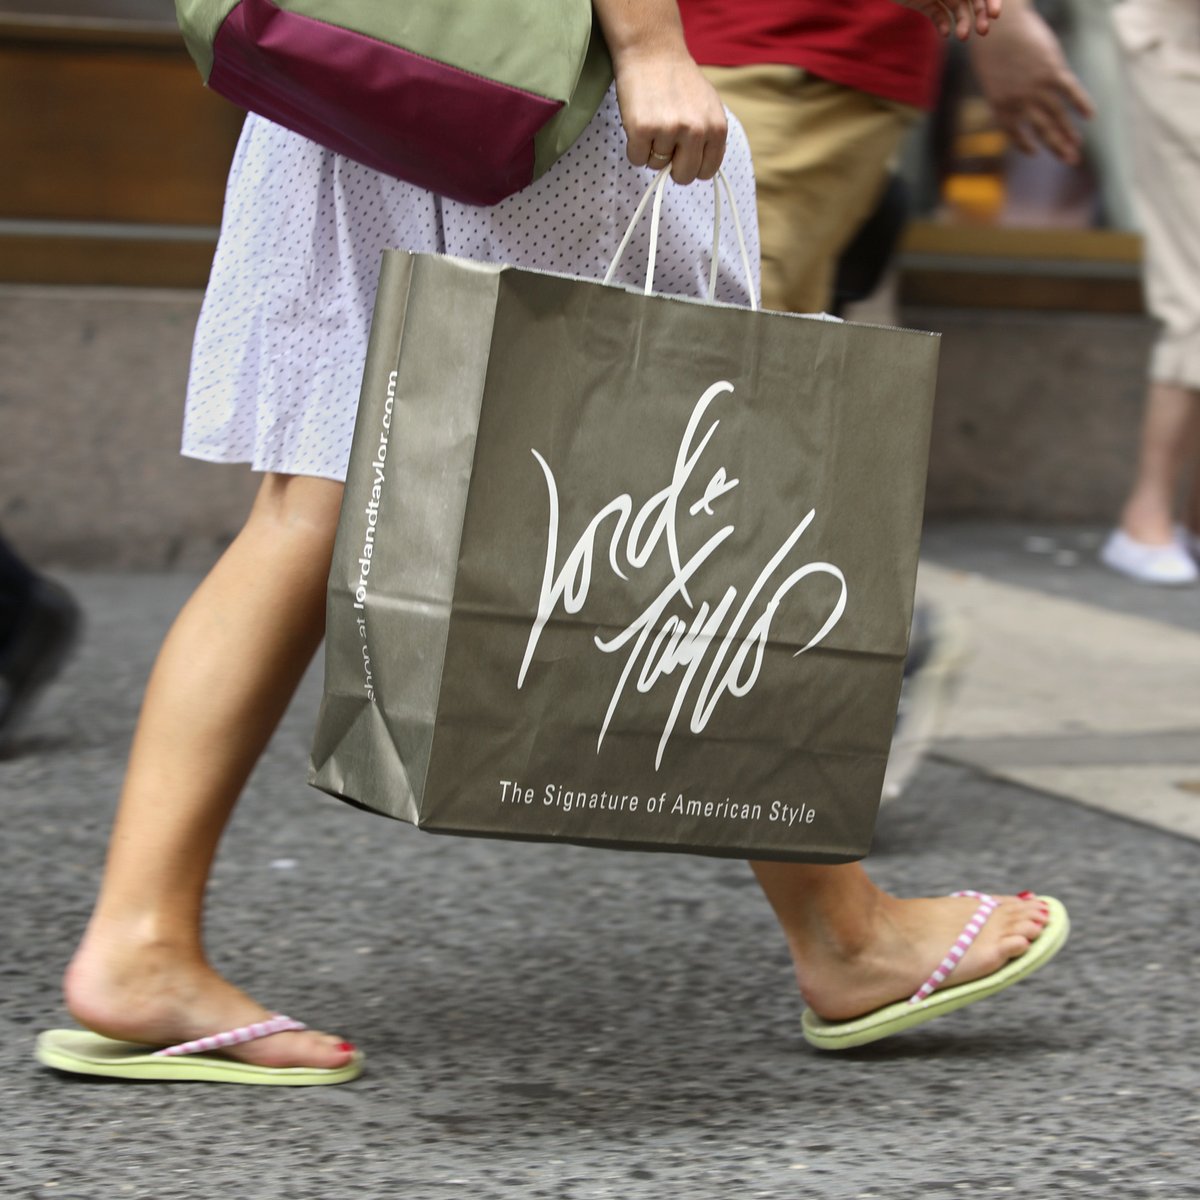 Why Le Tote Is Buying Lord & Taylor